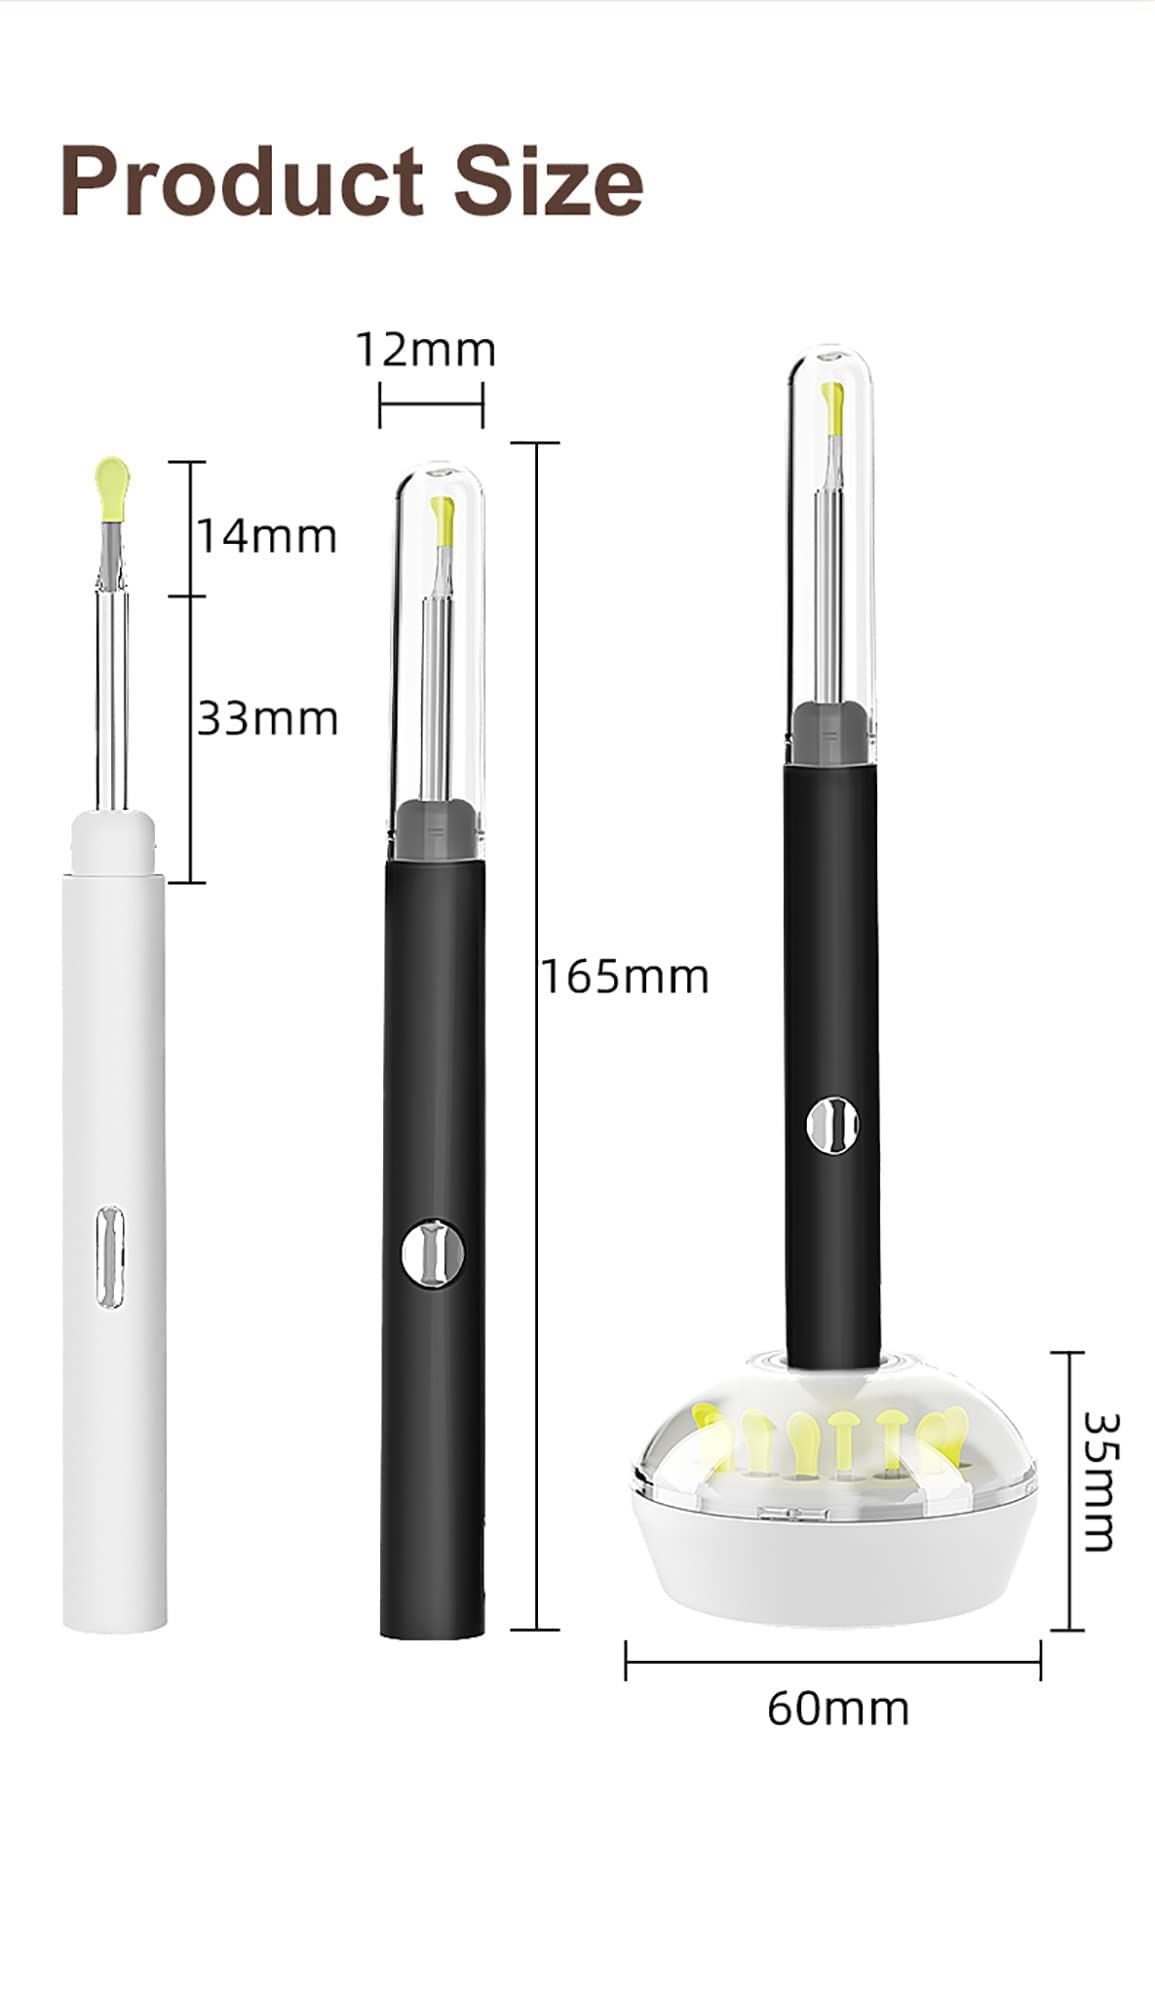 Ear Wax Removal Tool Camera, Ear Wax Removal, Ear Cleaner with Camera with 1080P Otoscope with Light, Ear Wax Removal Kit with 9 Ear Pick, Ear Camera Compatible for iPhone, iPad, Android Phone